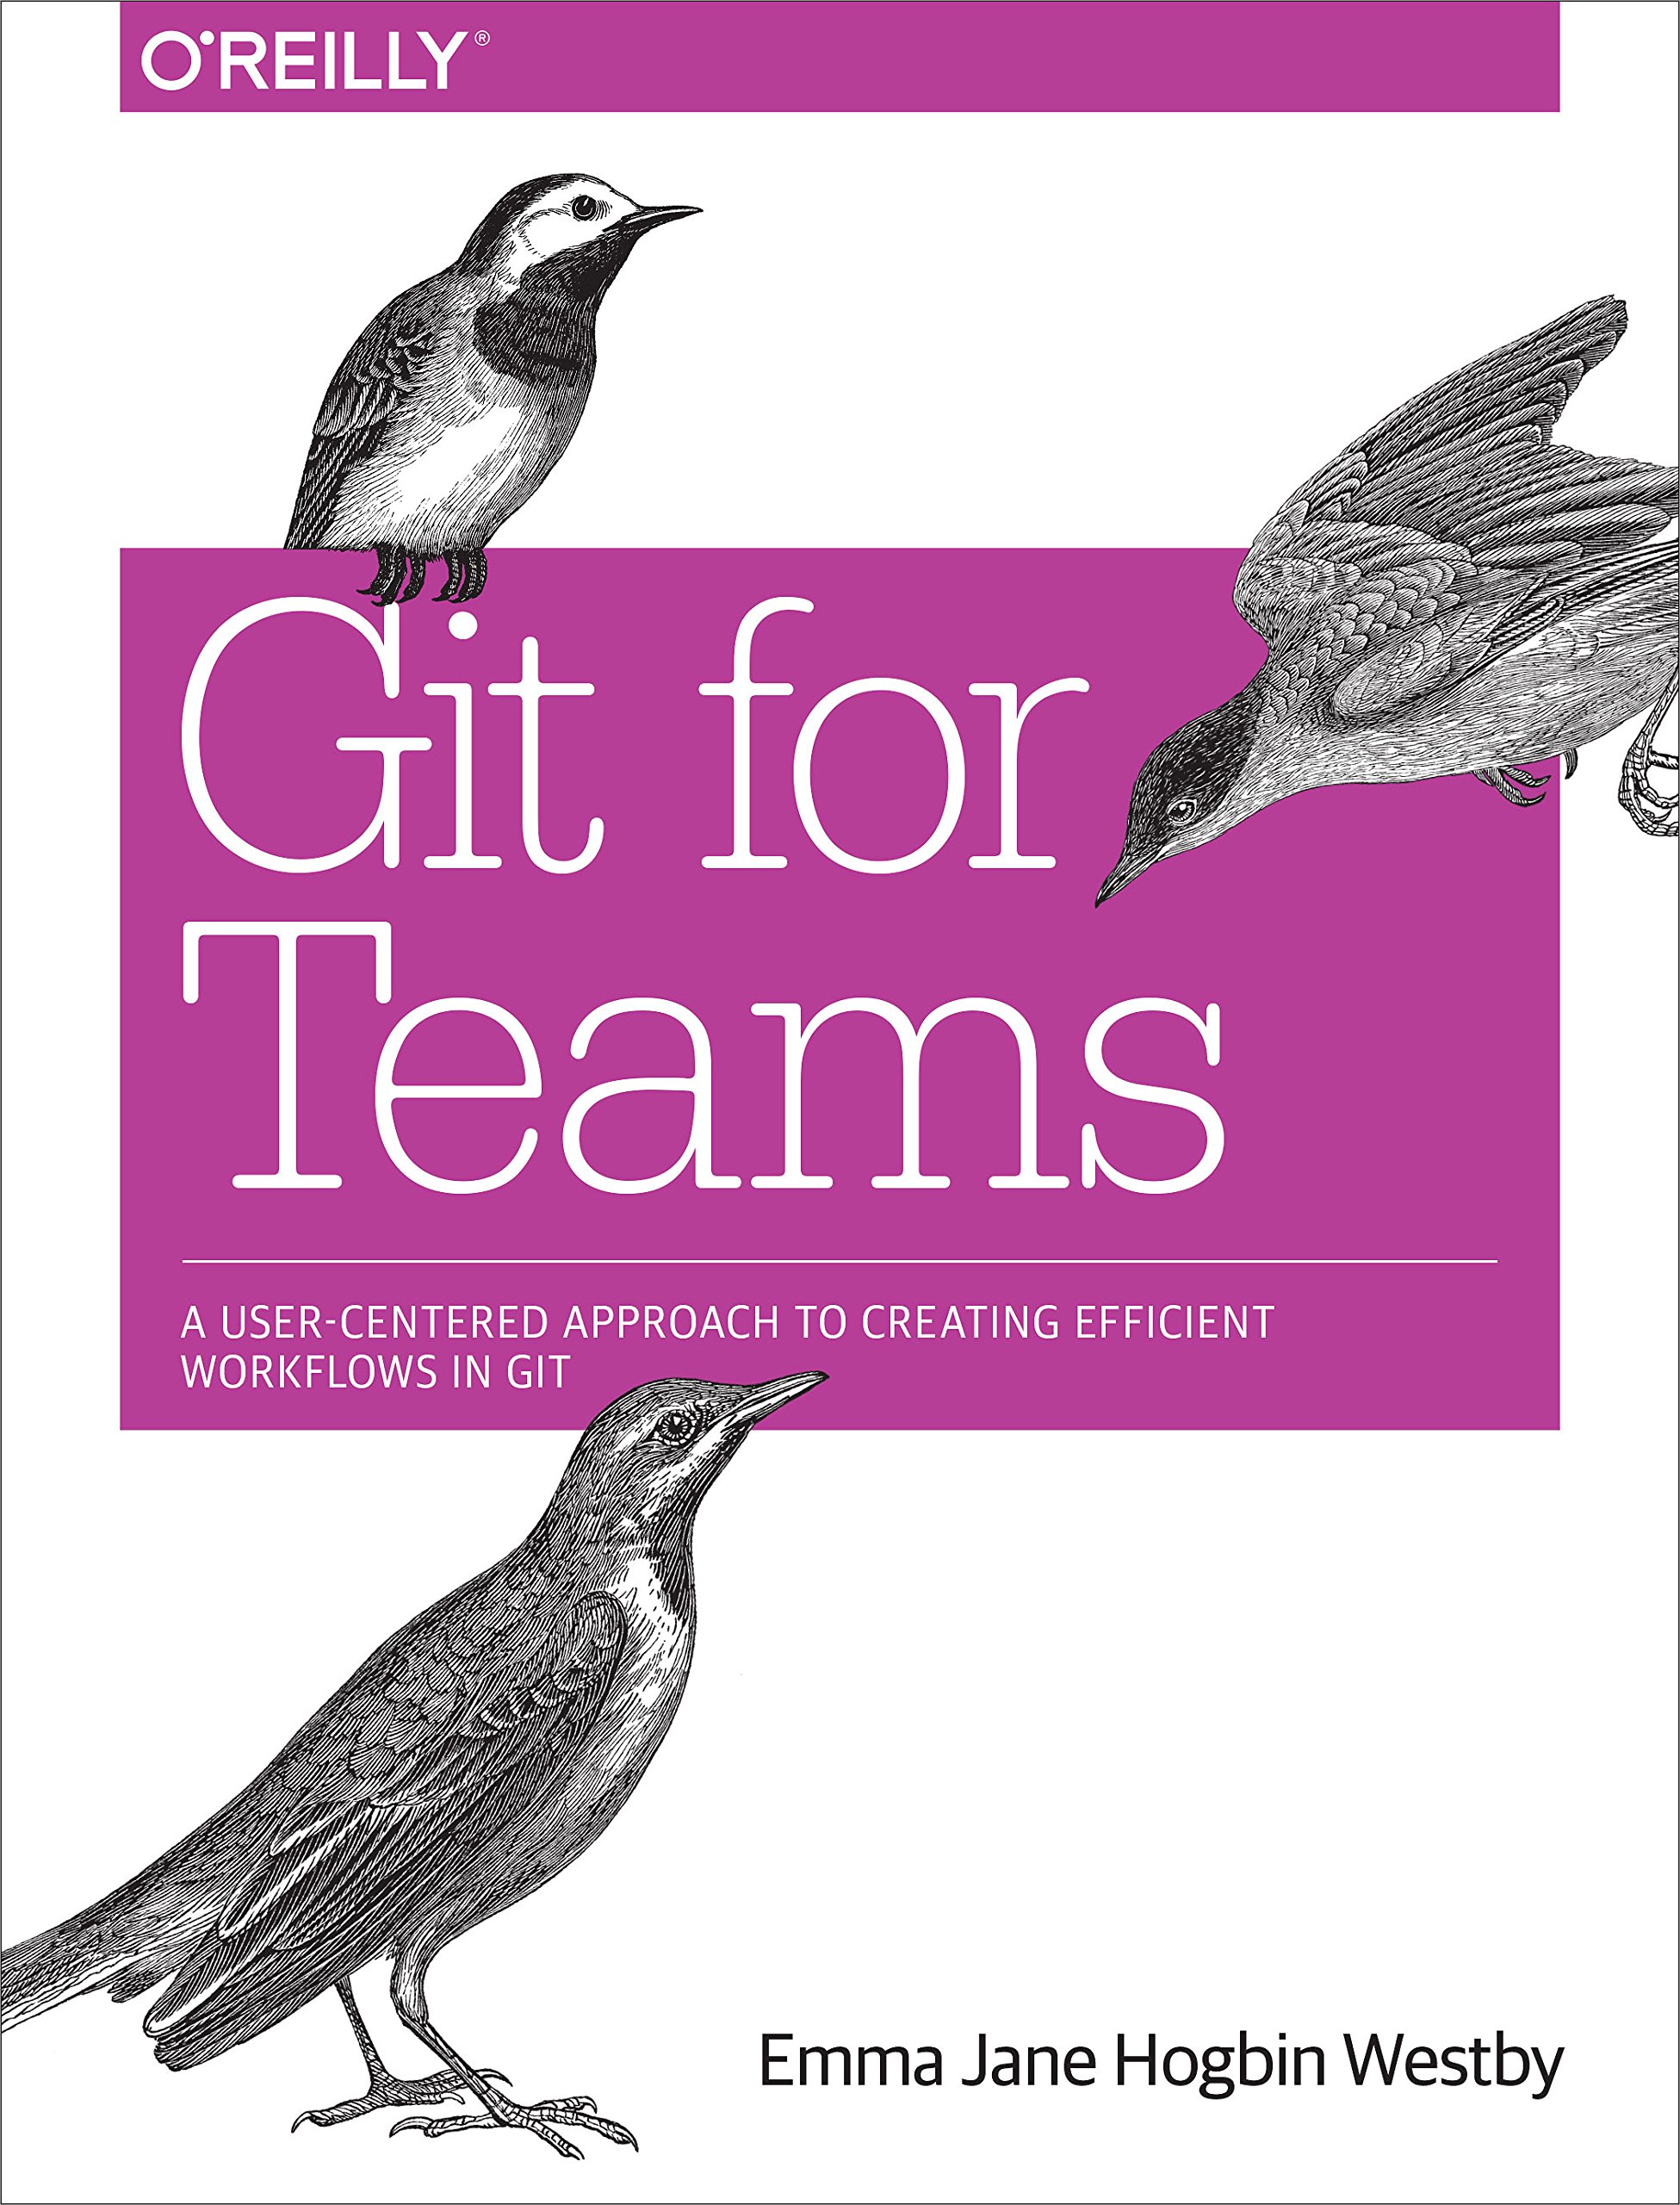 Git for Teams: A User-Centered Approach to Creating Efficient Workflows in Git by Emma Jane Hogbin Westby